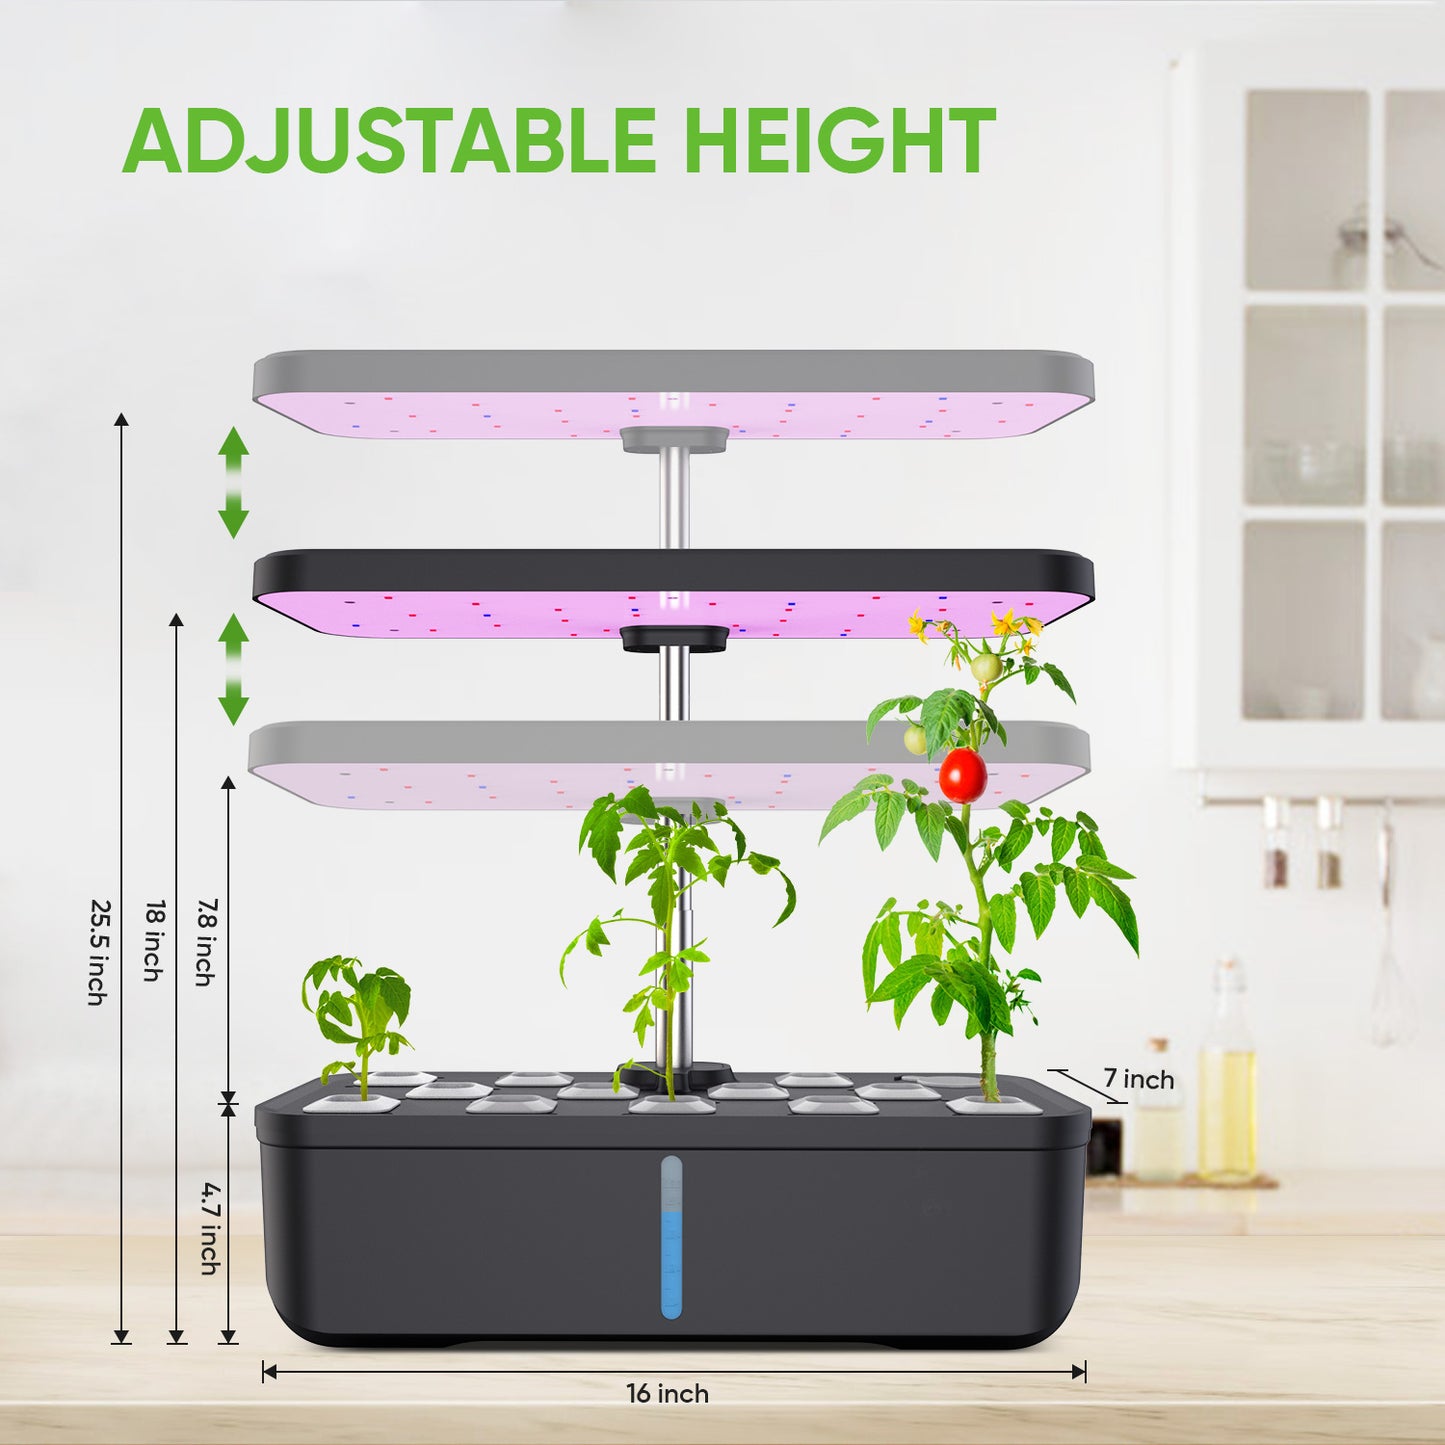 BEST SELLER 🥬🍓🌷🌿Hydroponics Growing System Garden Kit : 12 Pods Plant Germination Kit Herb Indoor Garden Growth Lamp Countertop with LED Grow Light